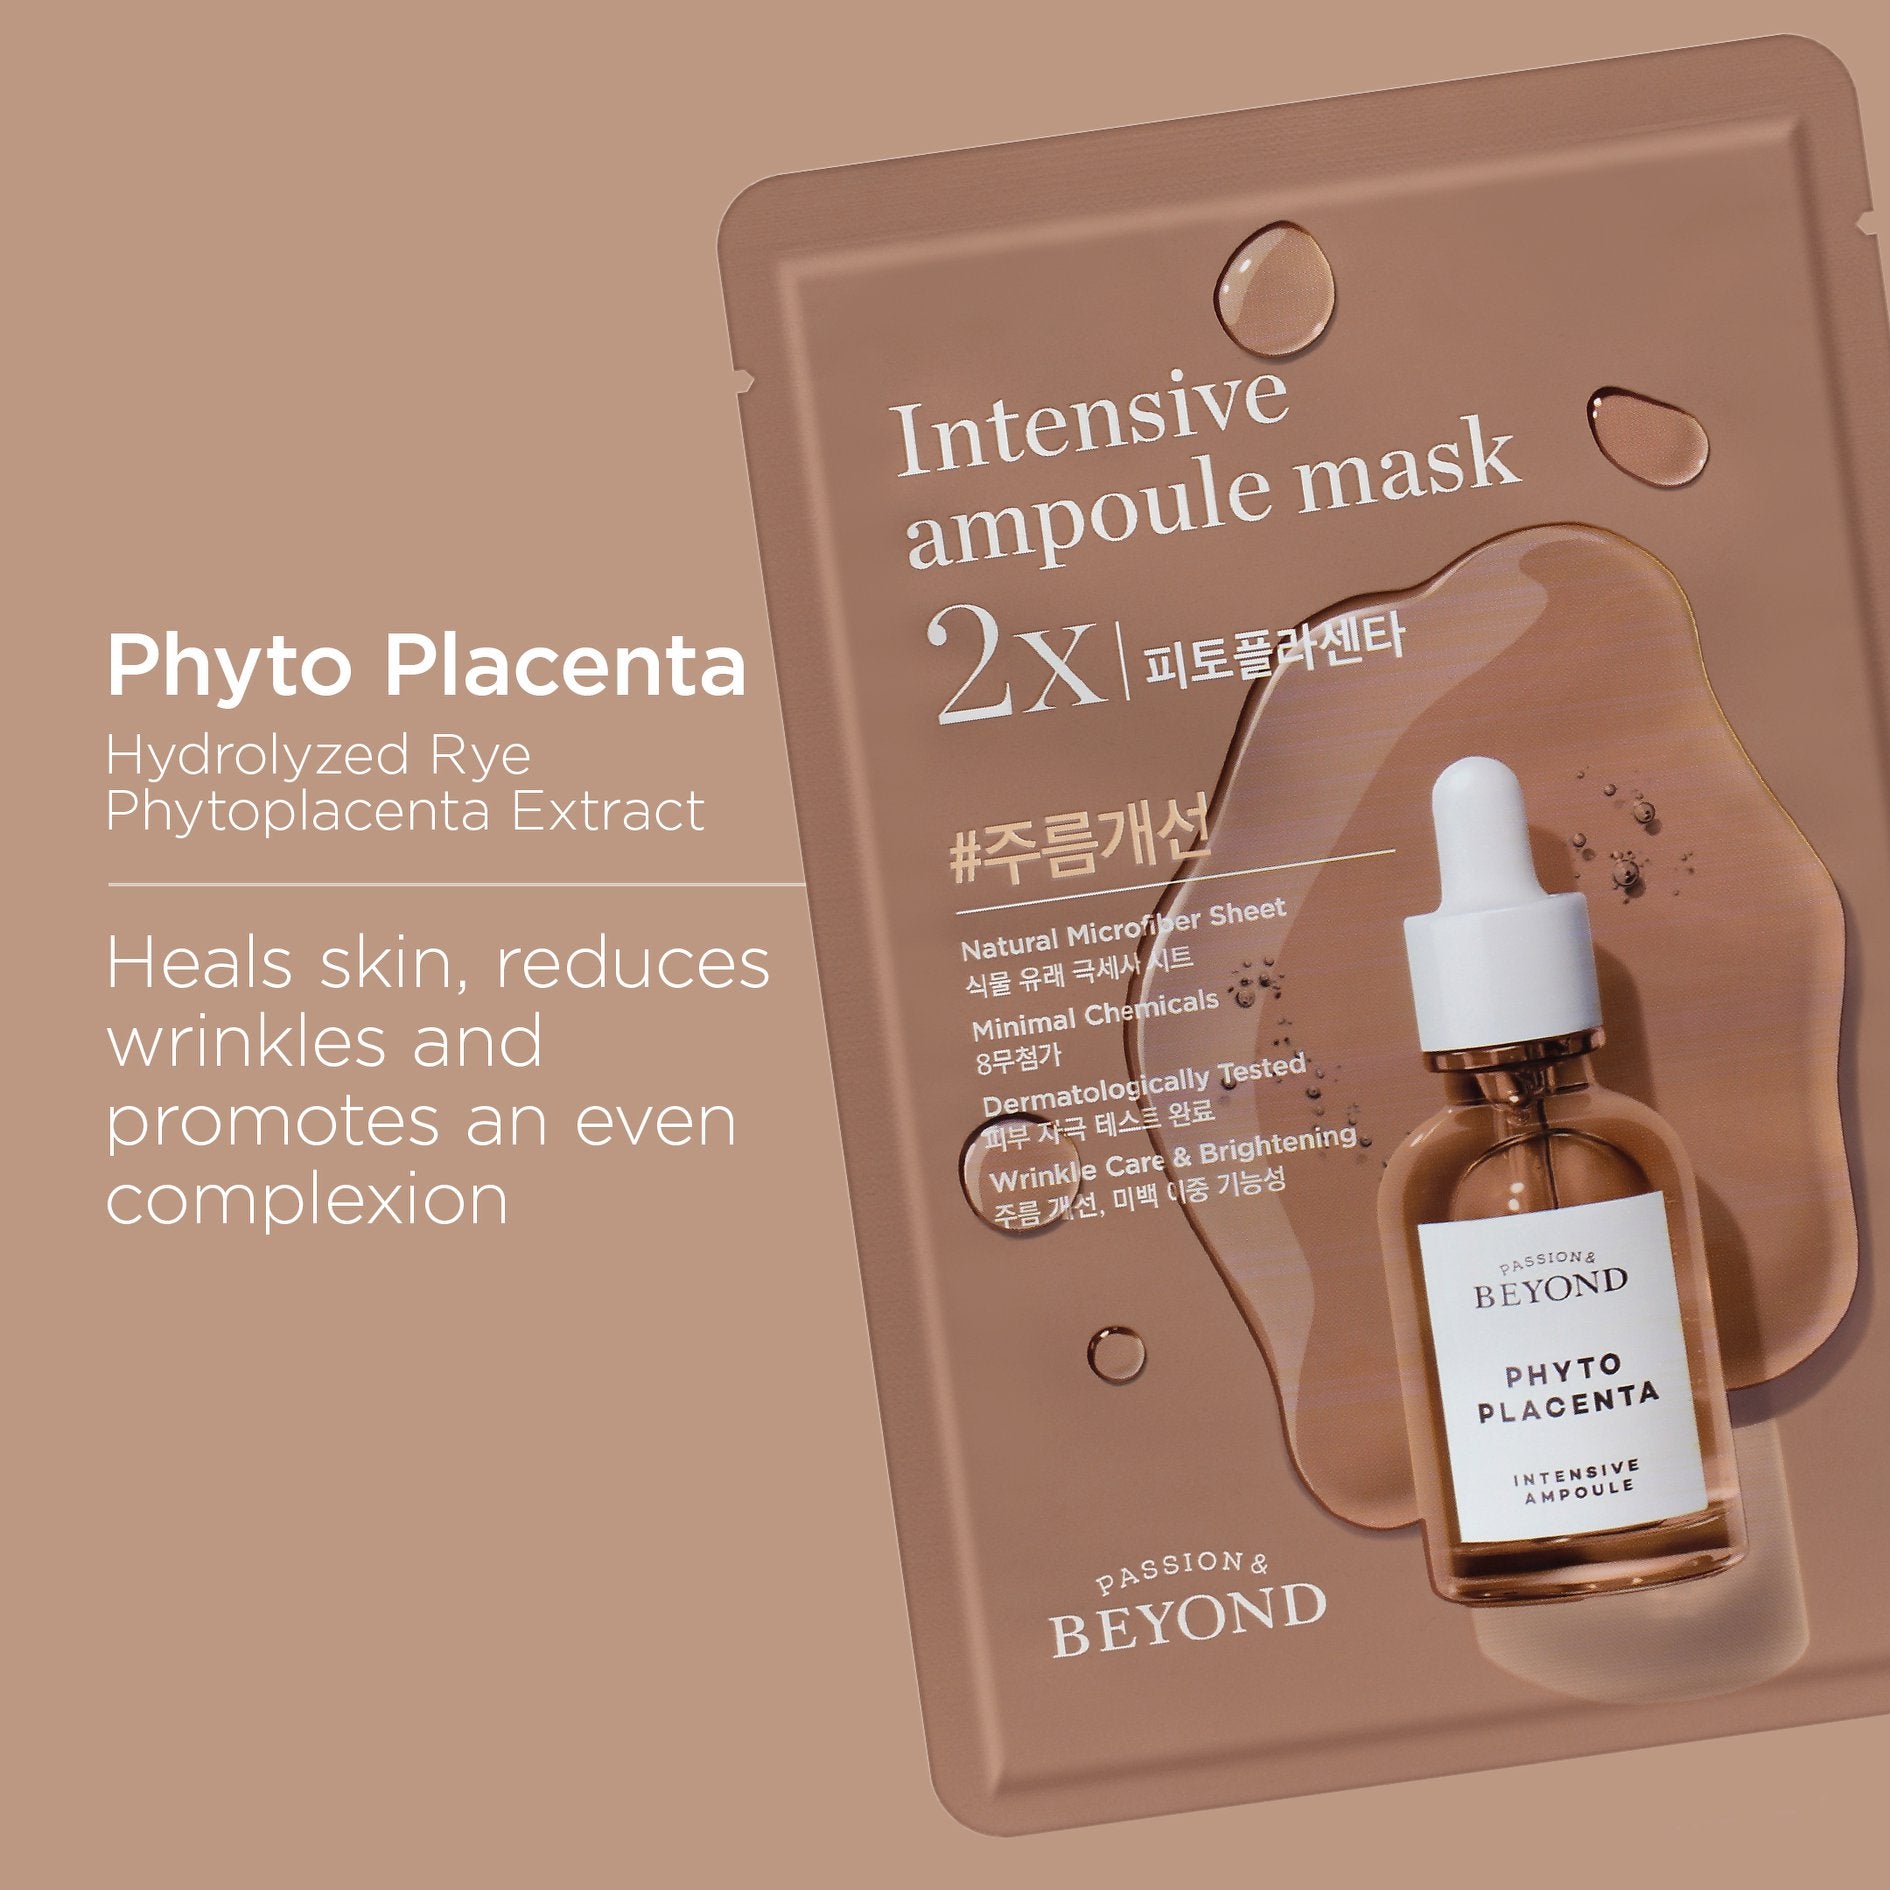 Passion and Beyond Intensive Ampoule Mask 2x ( Phyto Placenta ) - 25ml